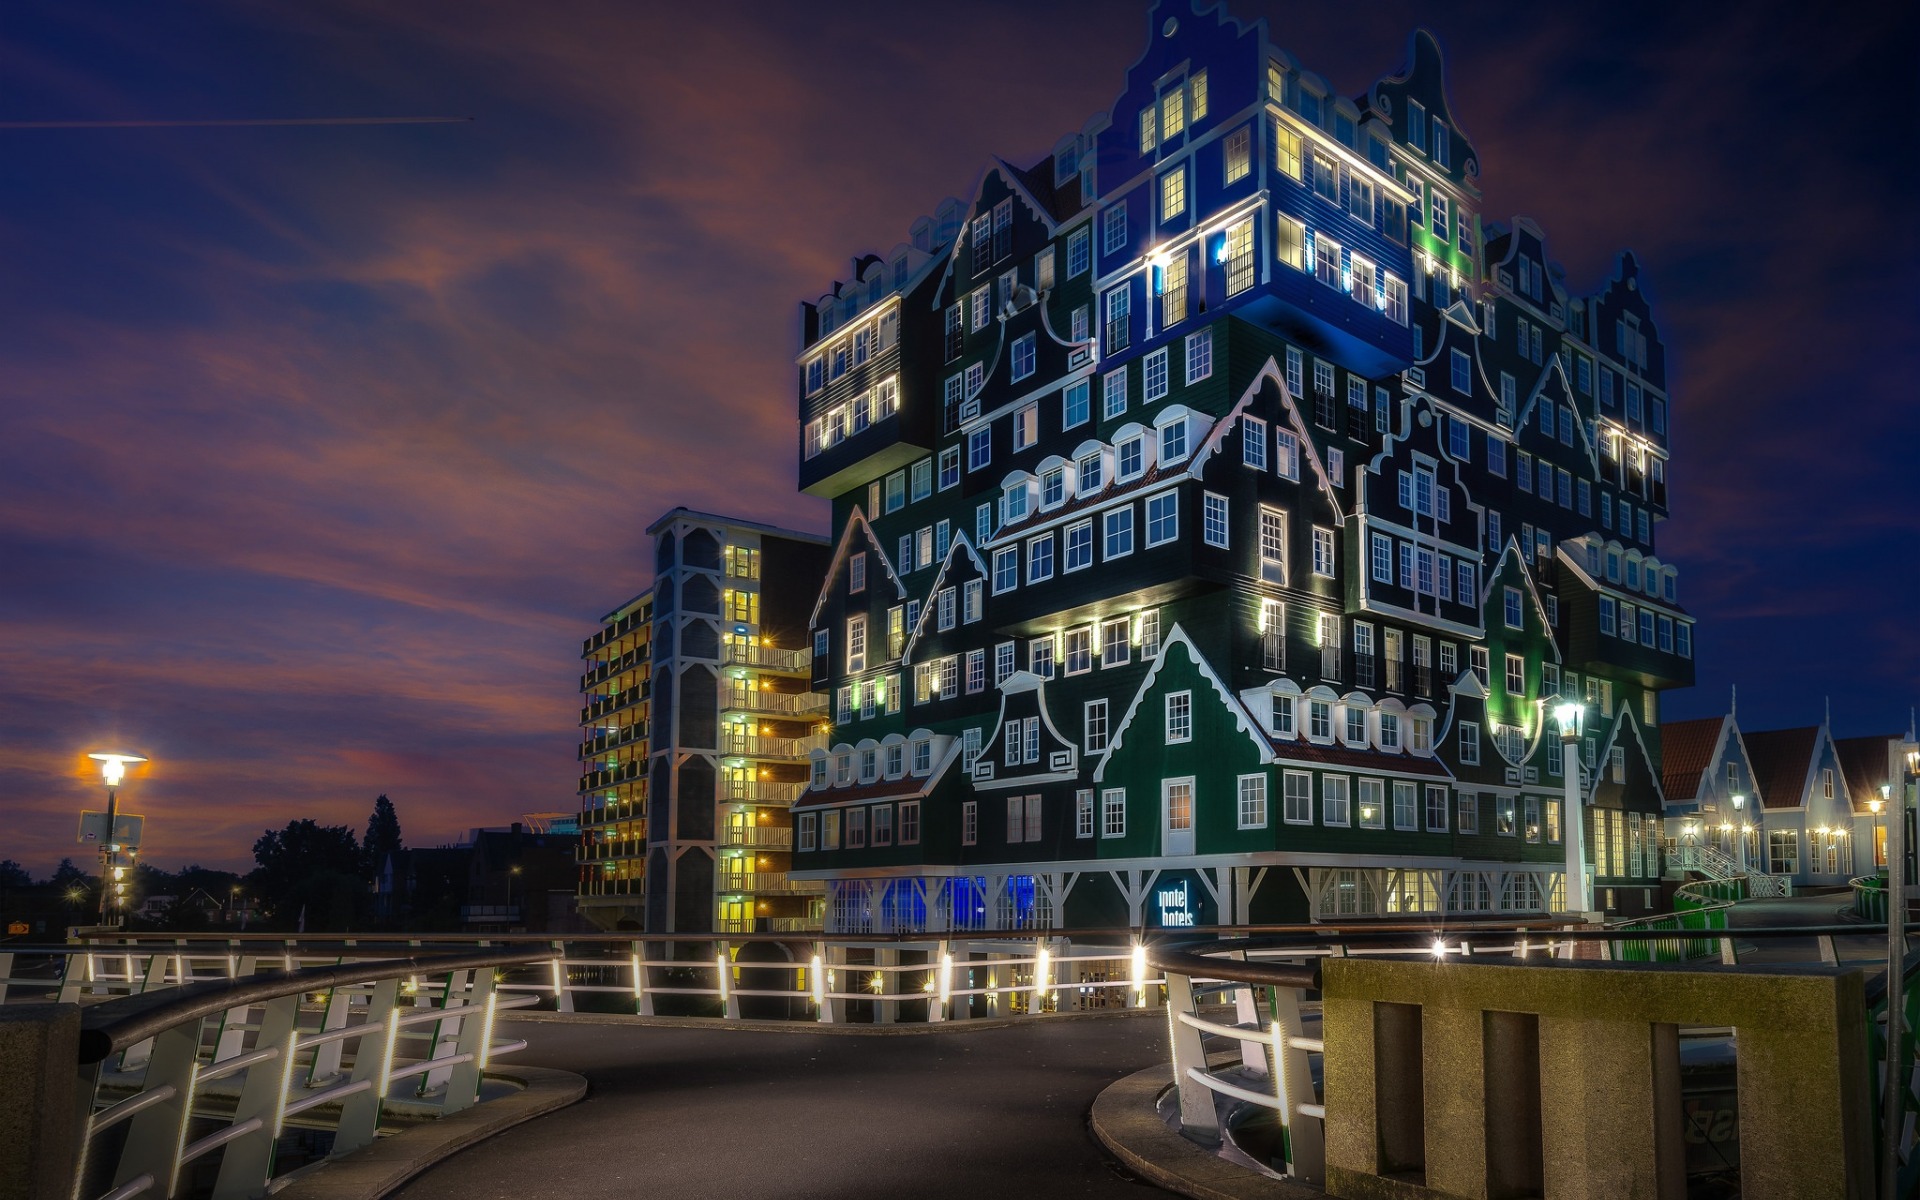 Download wallpaper Zaandam, hotel, North Holland, Netherlands, beautiful building, evening, city lights for desktop with resolution 1920x1200. High Quality HD picture wallpaper